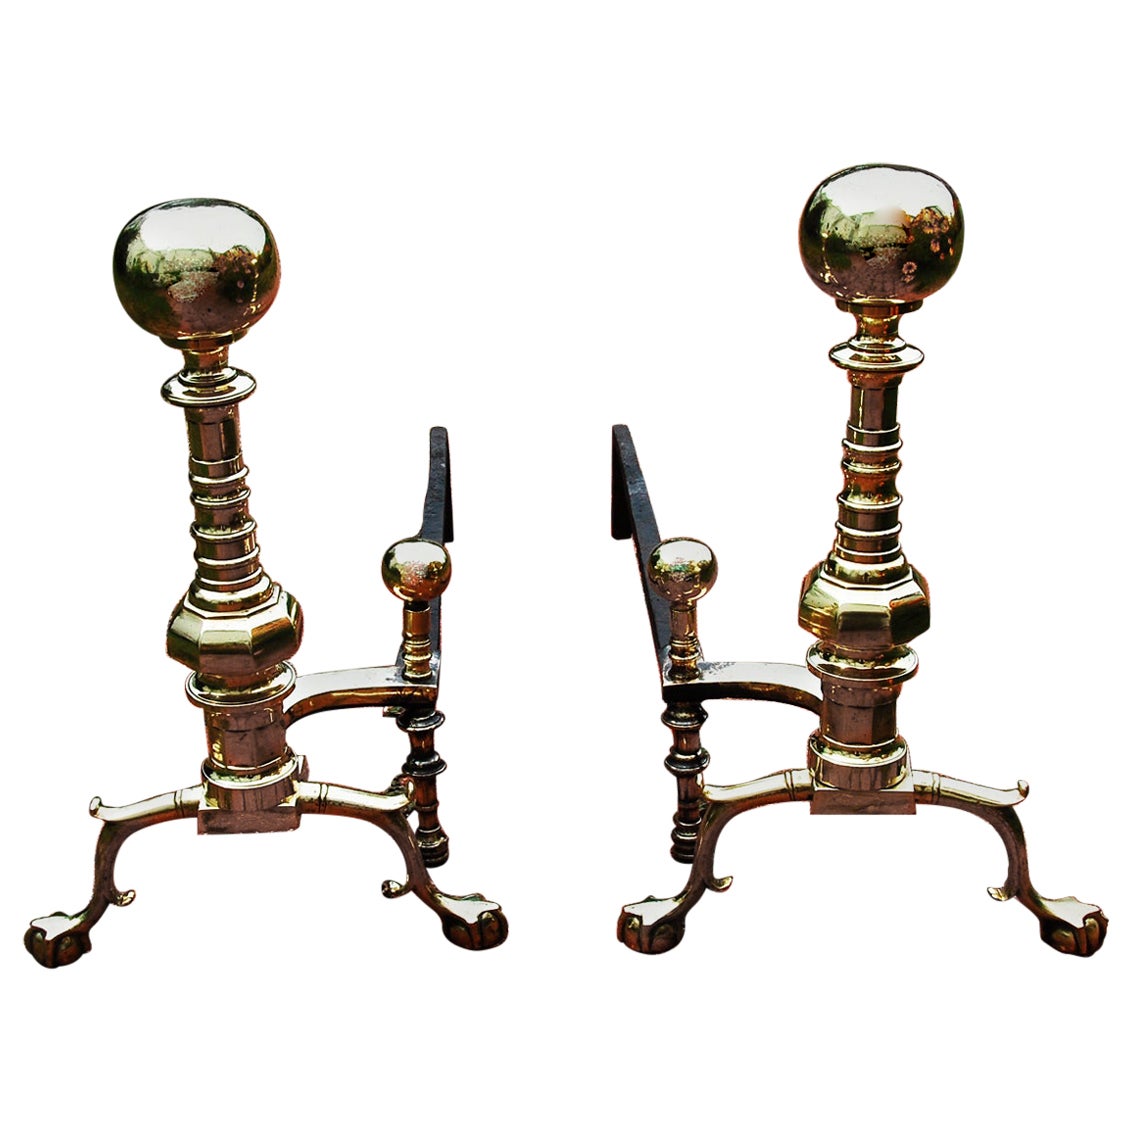 American Mid 19th Century Cast Brass Ball and Beehive Andirons